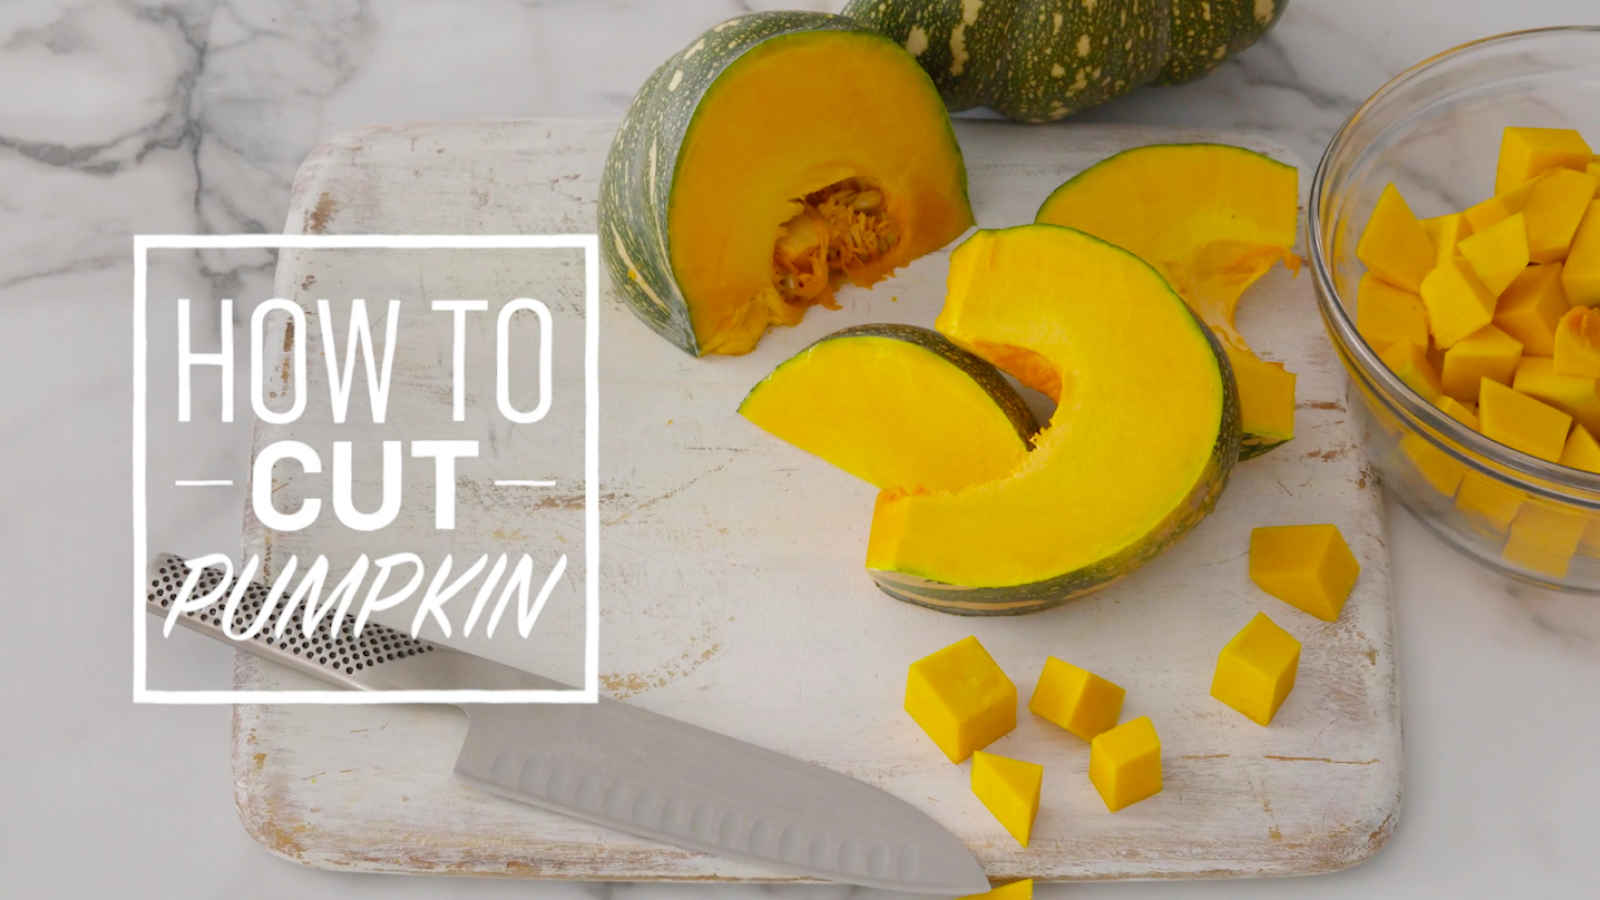 Can the Blatant Knife cut a pumpkin? . #foodie #cooking